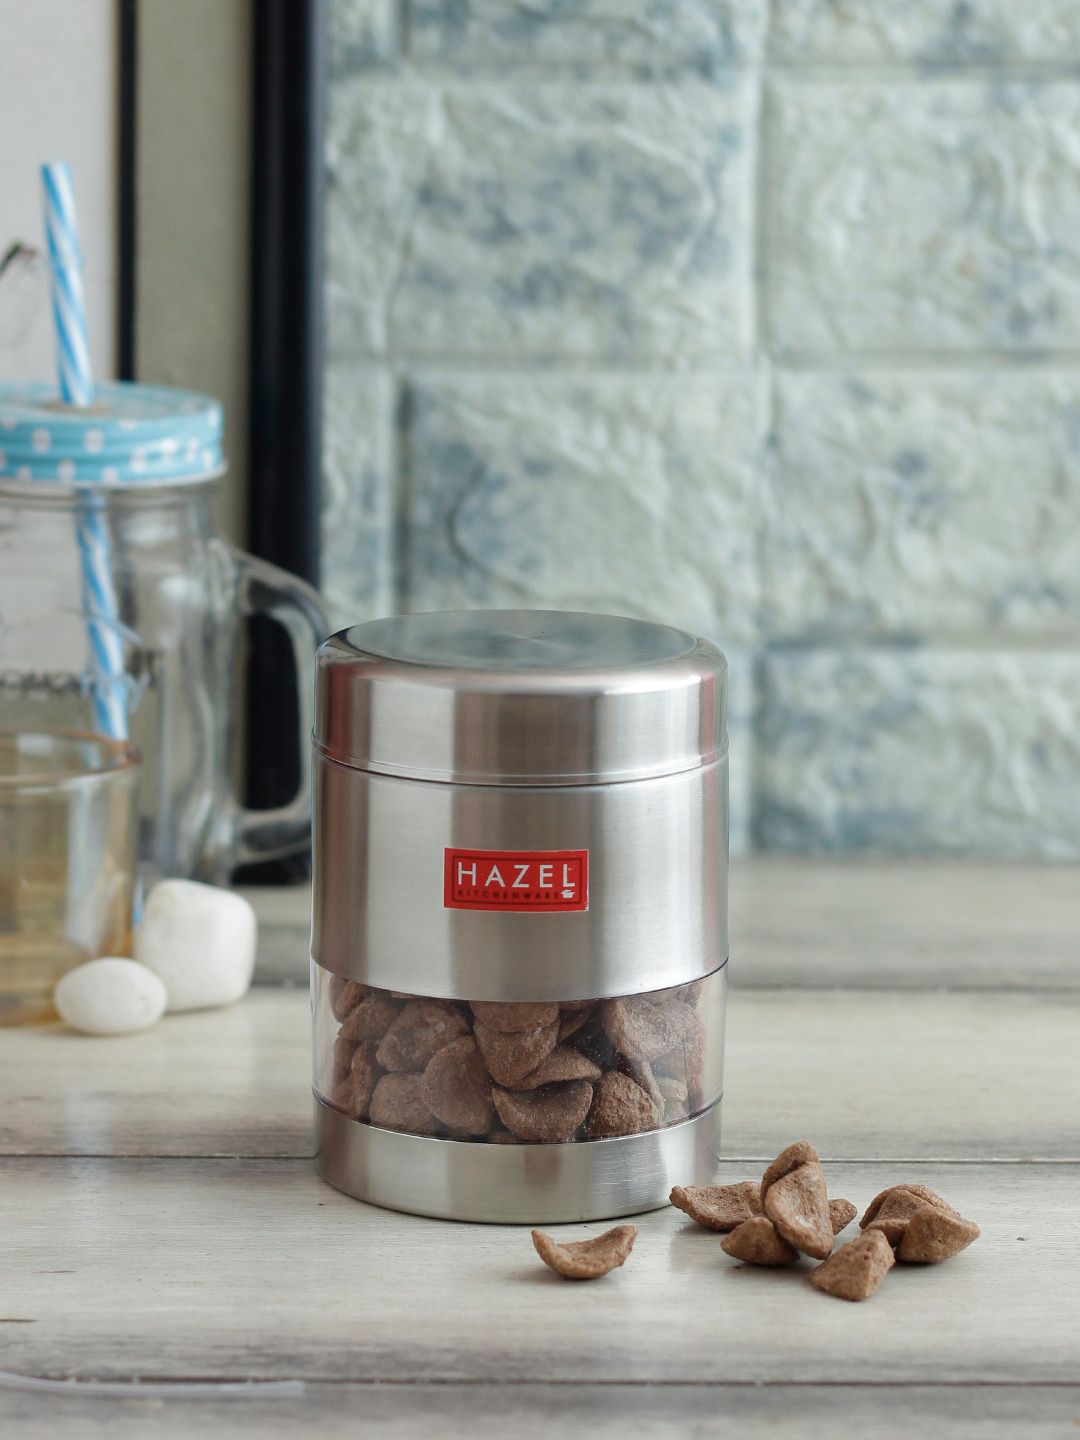 HAZEL Set Of 6 Silver & Transparent Stainless Steel Containers With Lids 500 ml Price in India